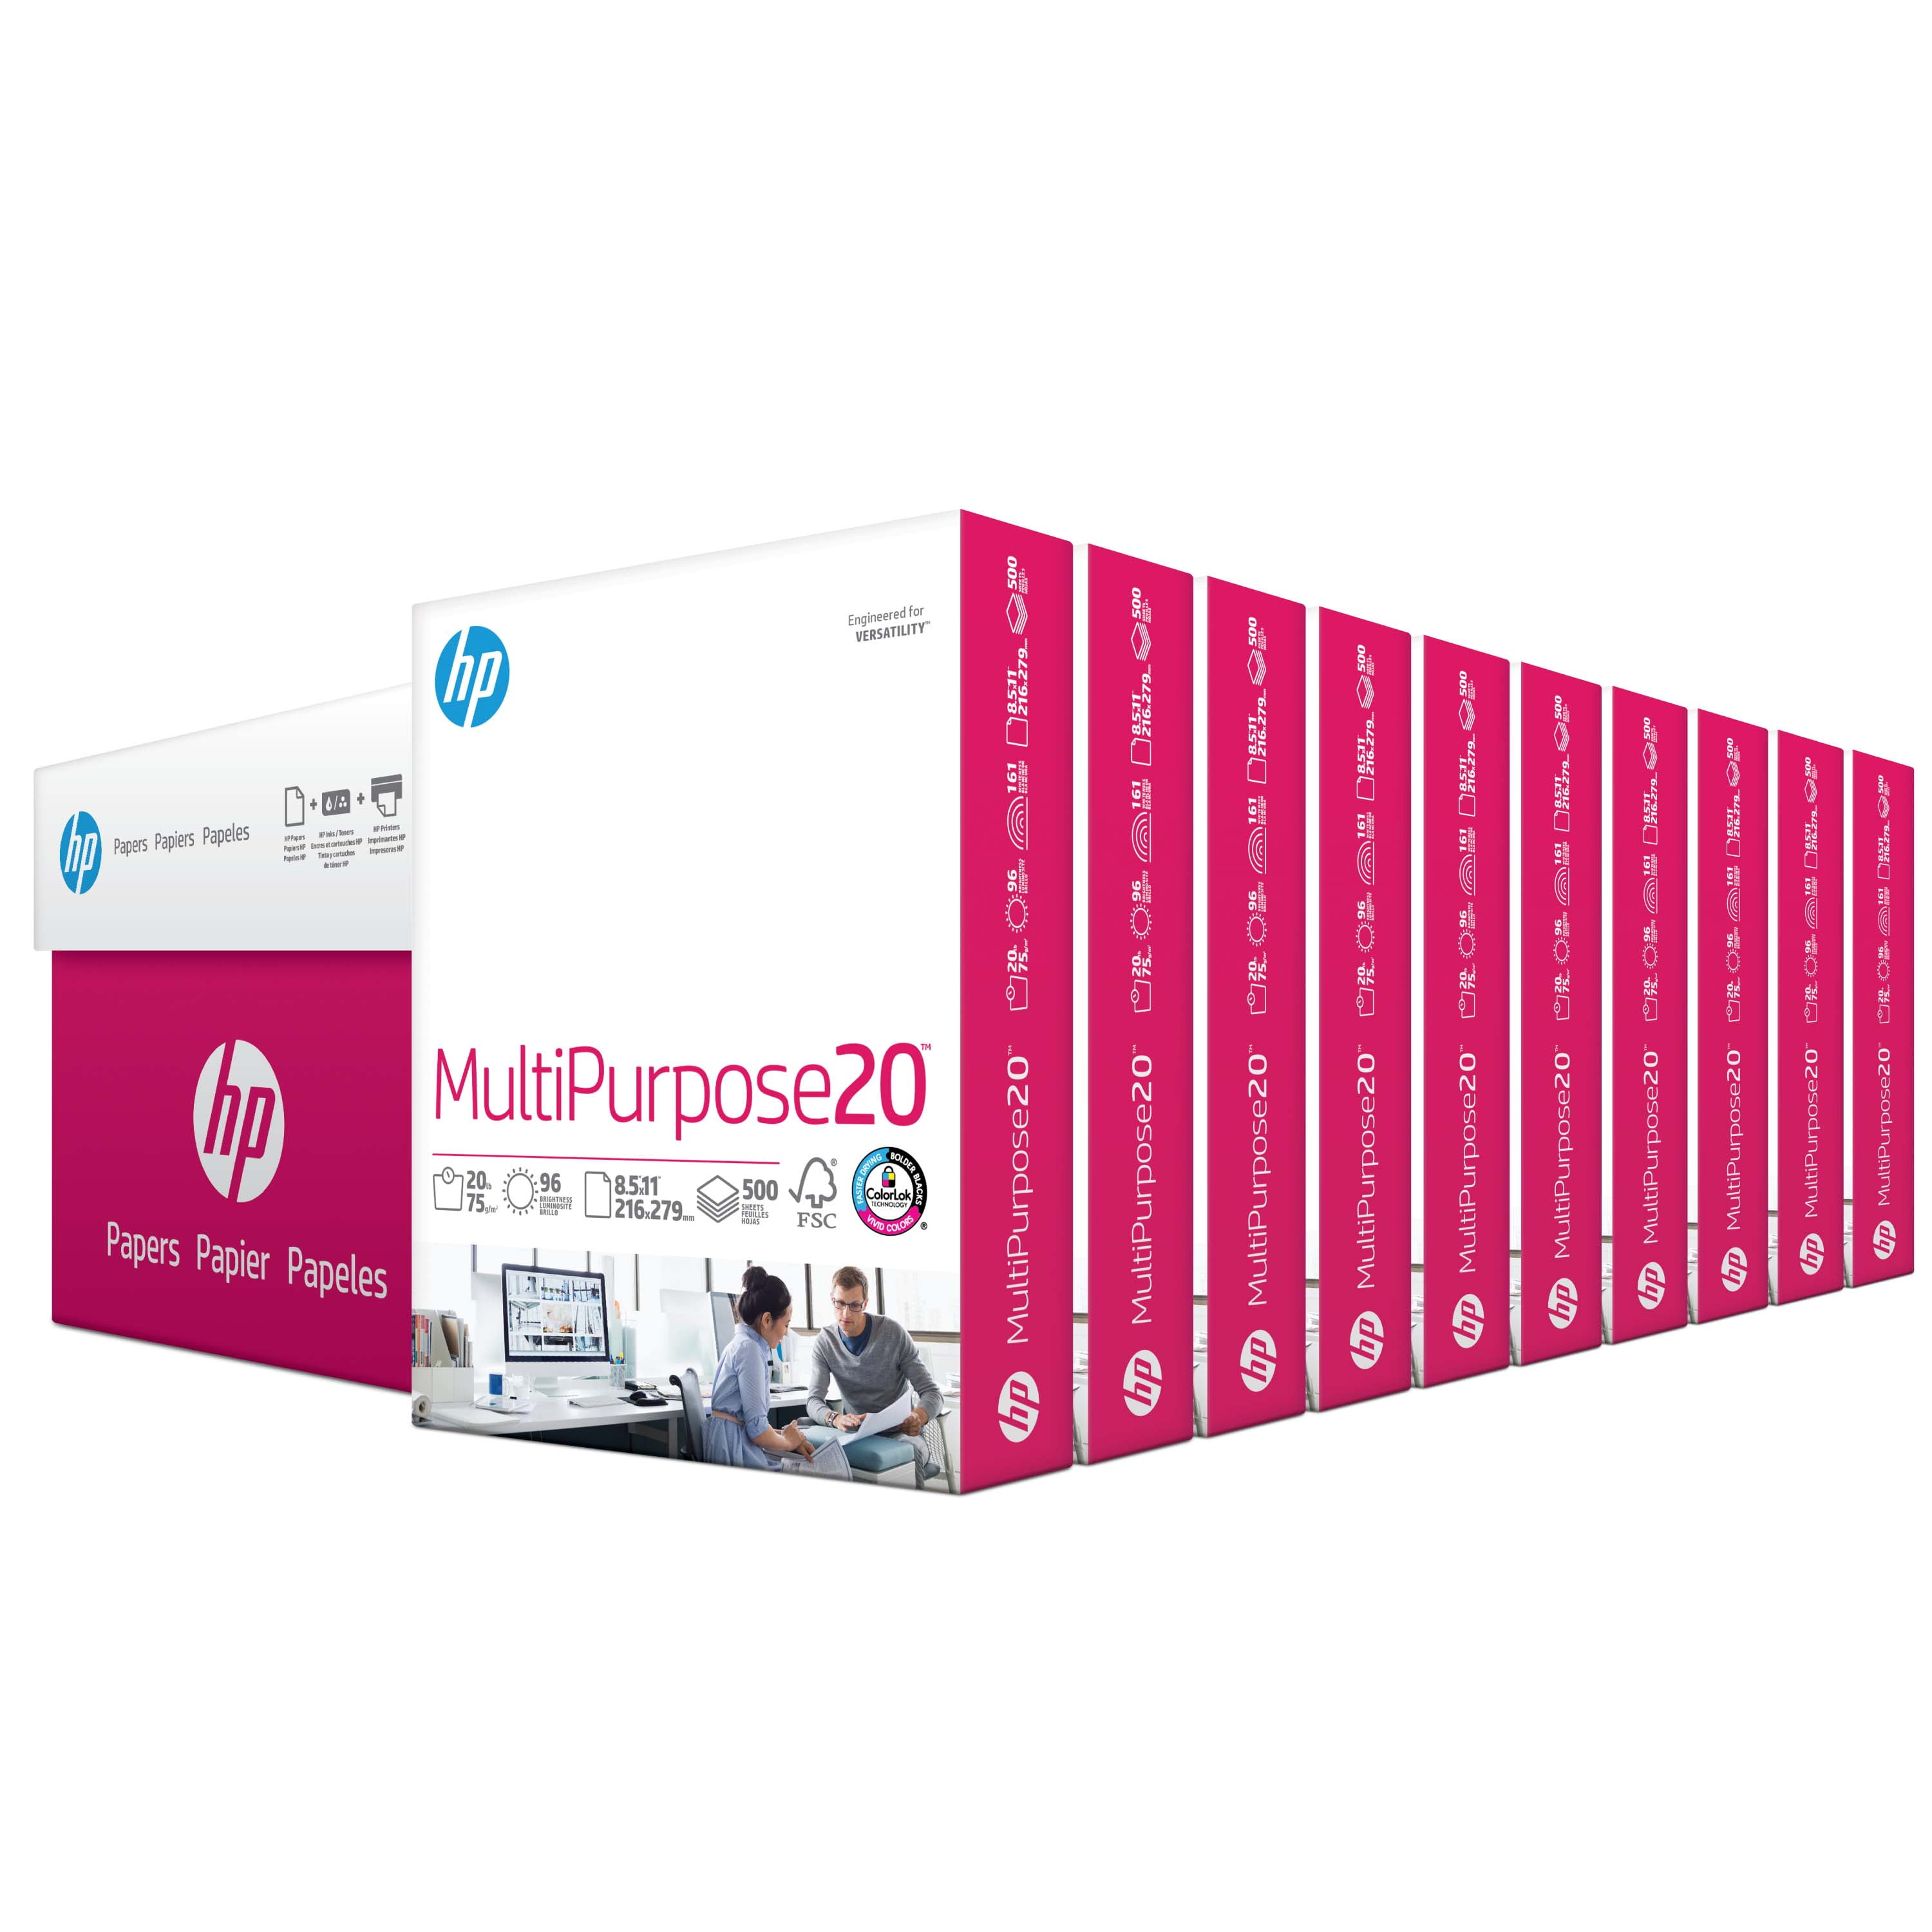 HP Printer Paper MultiPurpose 20lb, 8.5 x 11 Paper, 5 Ream Case, 2,500  Sheets, Made in USA, Forest Stewardship Council Certified, 96 Bright, Acid  Free, Engineered for HP Compatibility, 115100PC